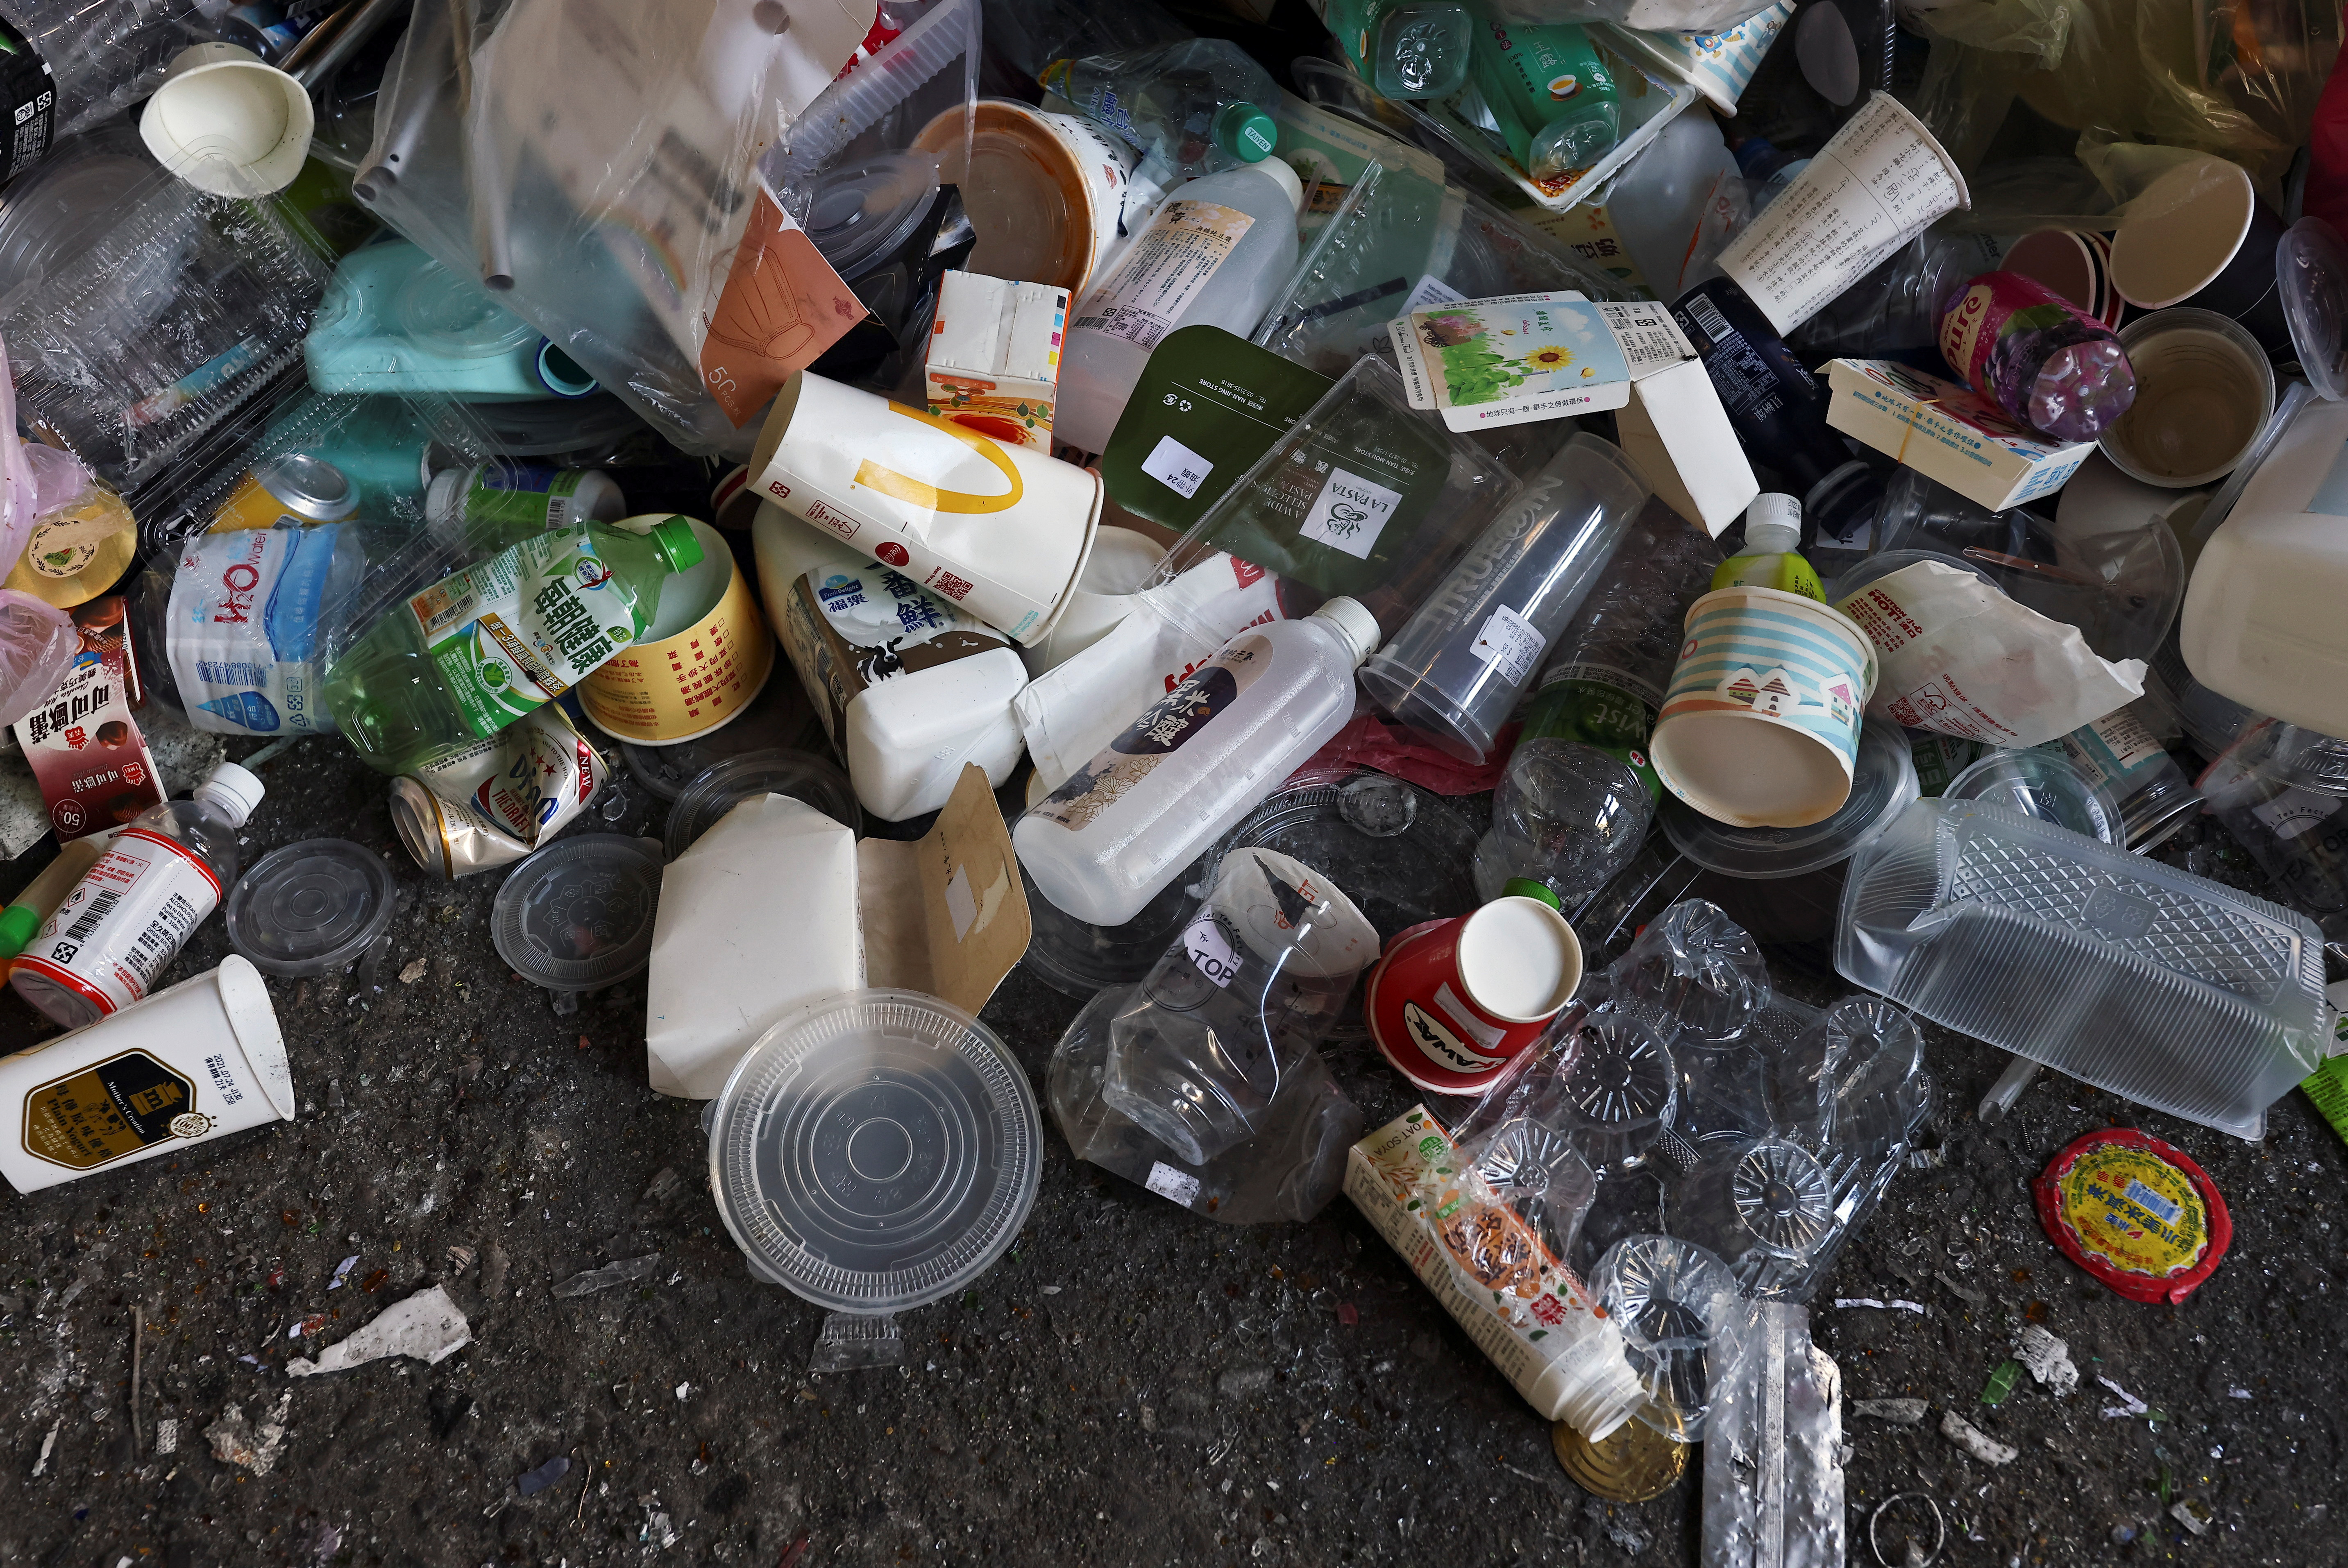 Take-out containers are seen amid other trash at a waste collection plant in Taipei